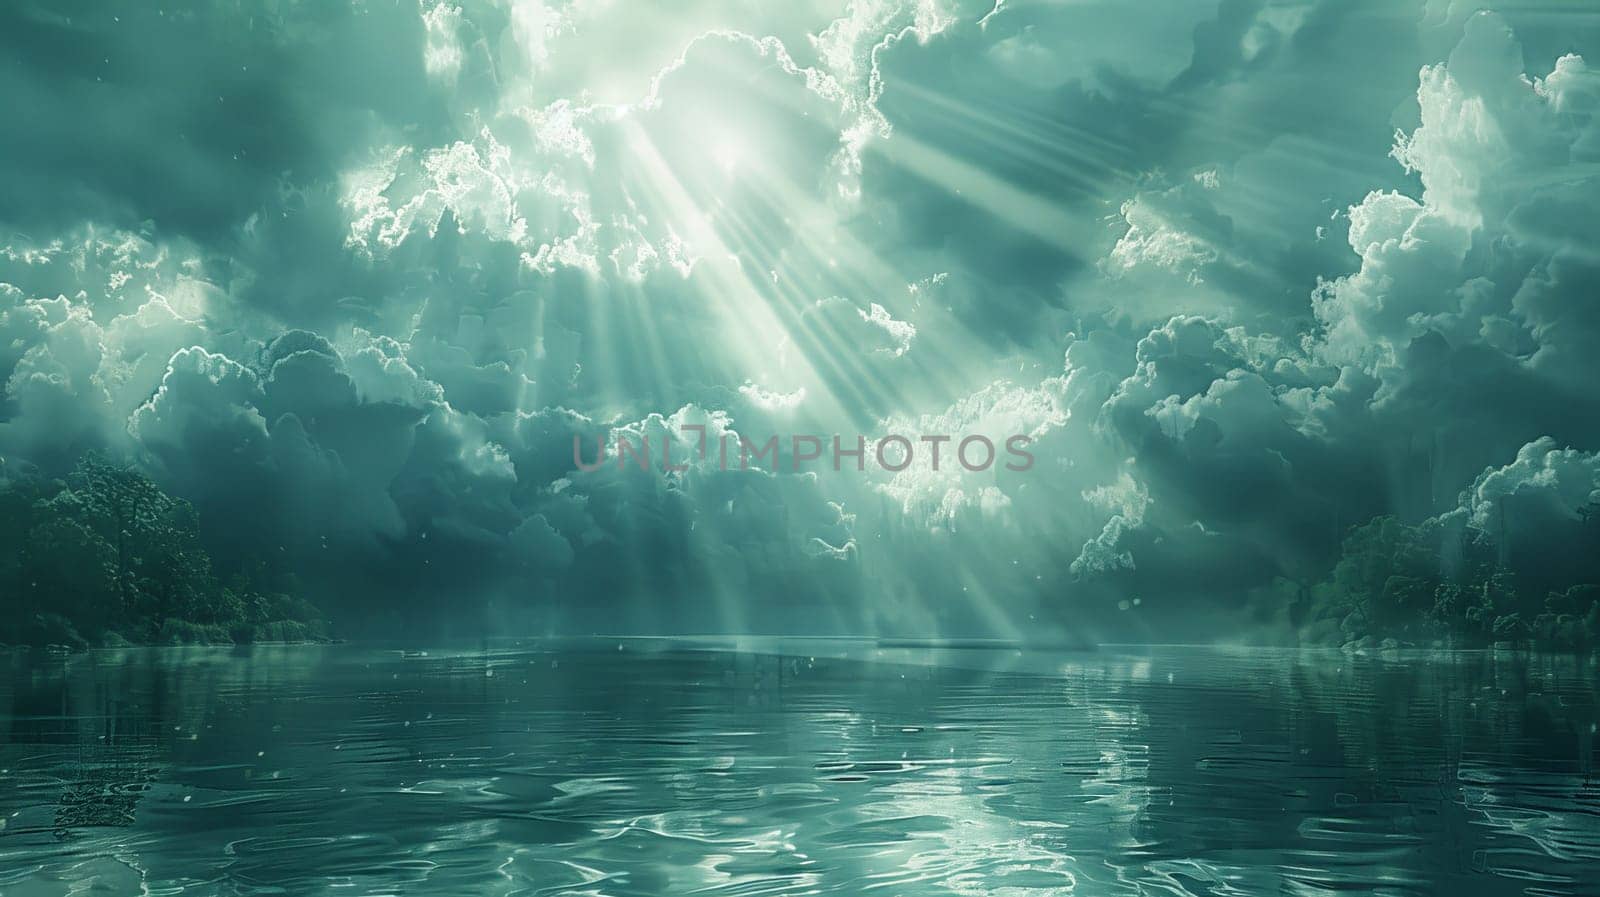 A beautiful blue sky with clouds and a bright sun shining through them. The sun is casting a warm glow on the water, creating a serene and peaceful atmosphere